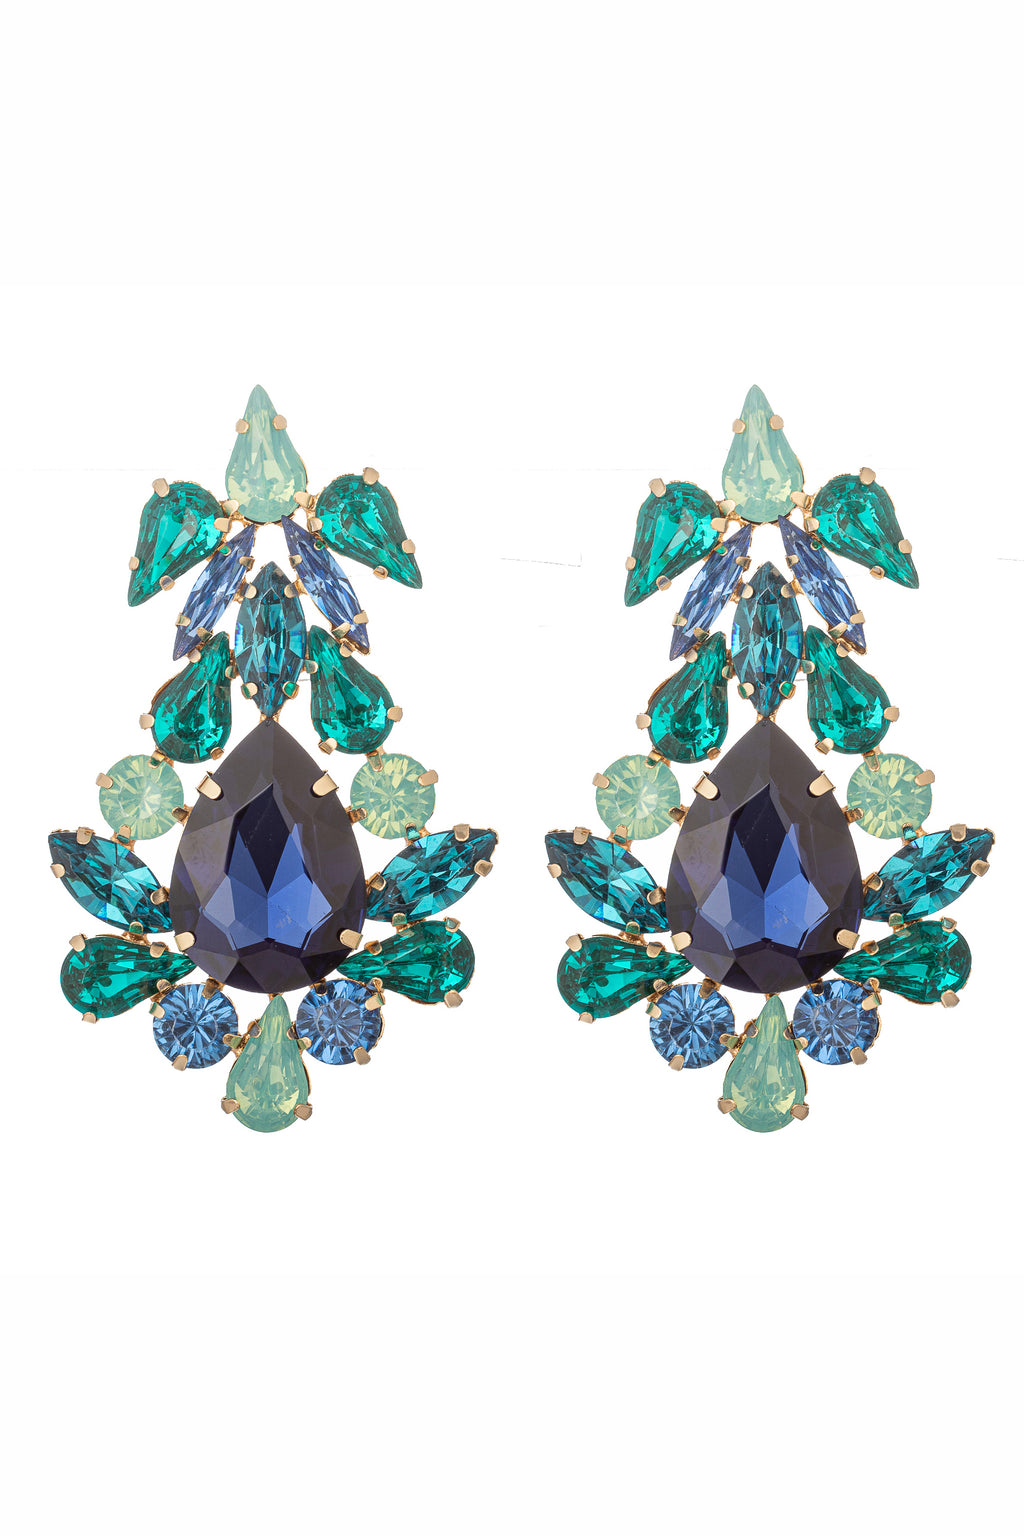 Gold tone alloy statement earrings with blue and green glass crystals.